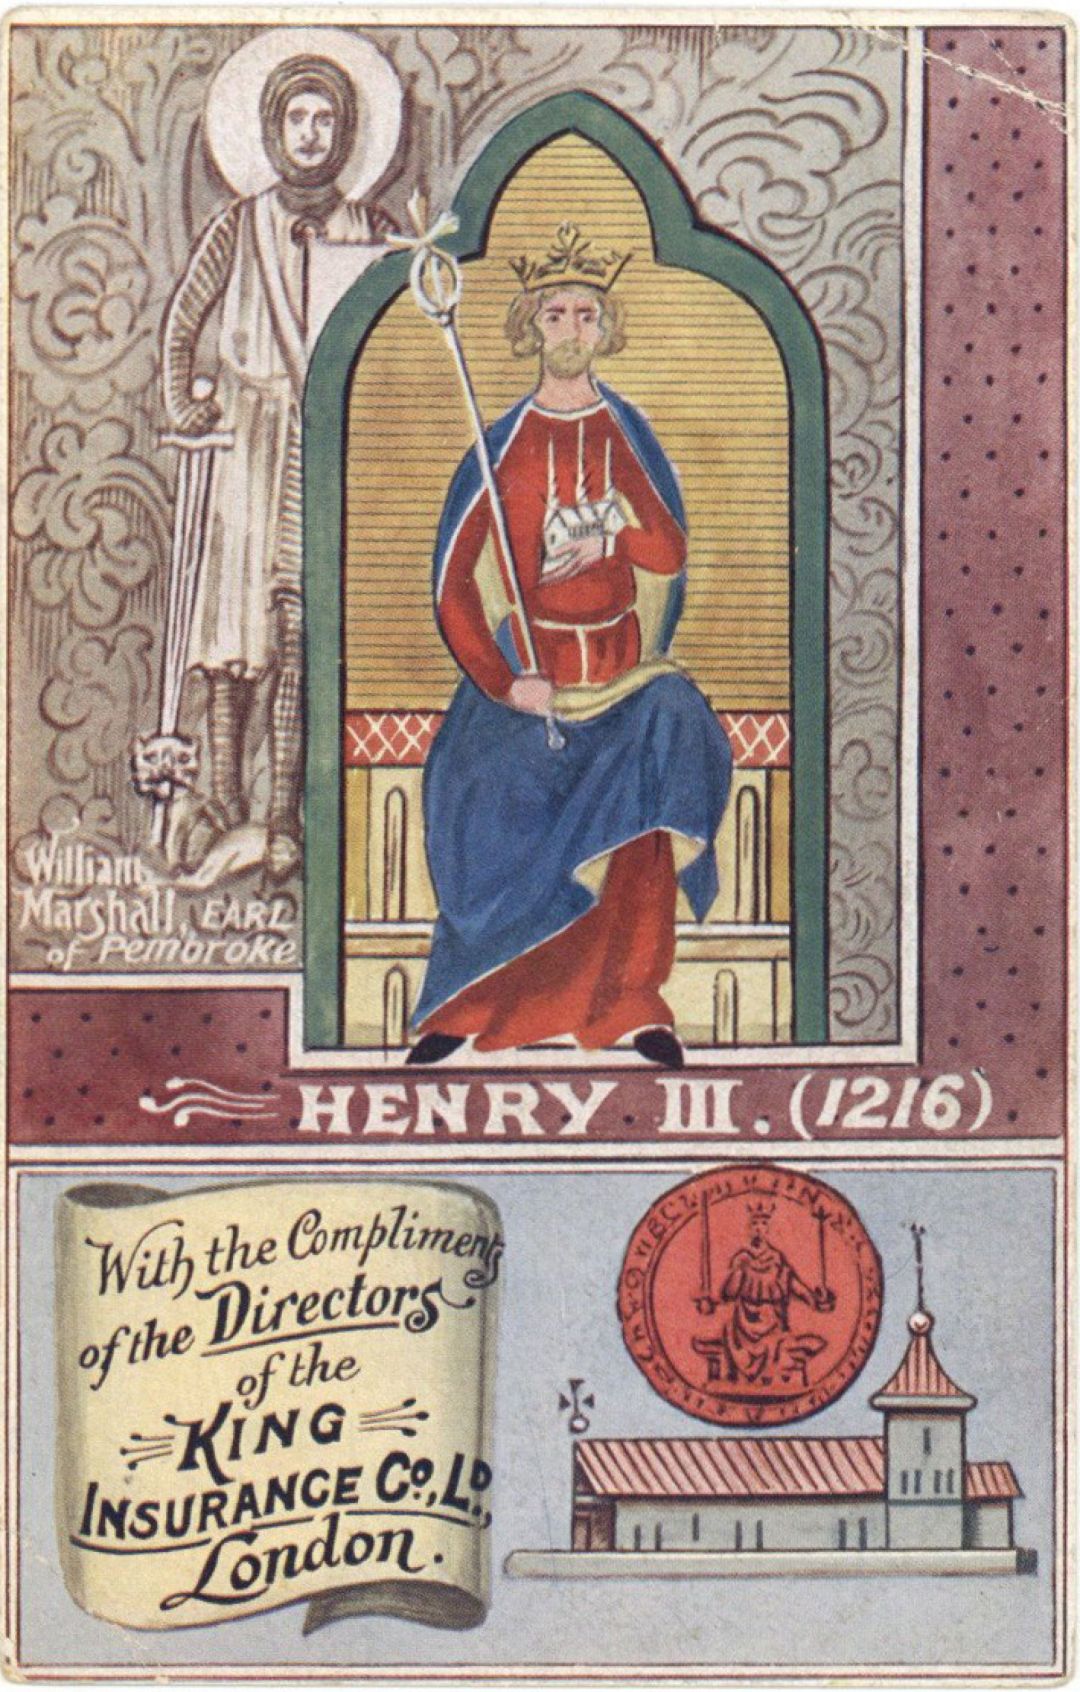 Post Card Ad for King Insurance Co. Ltd. dated 1216 -  Insurance